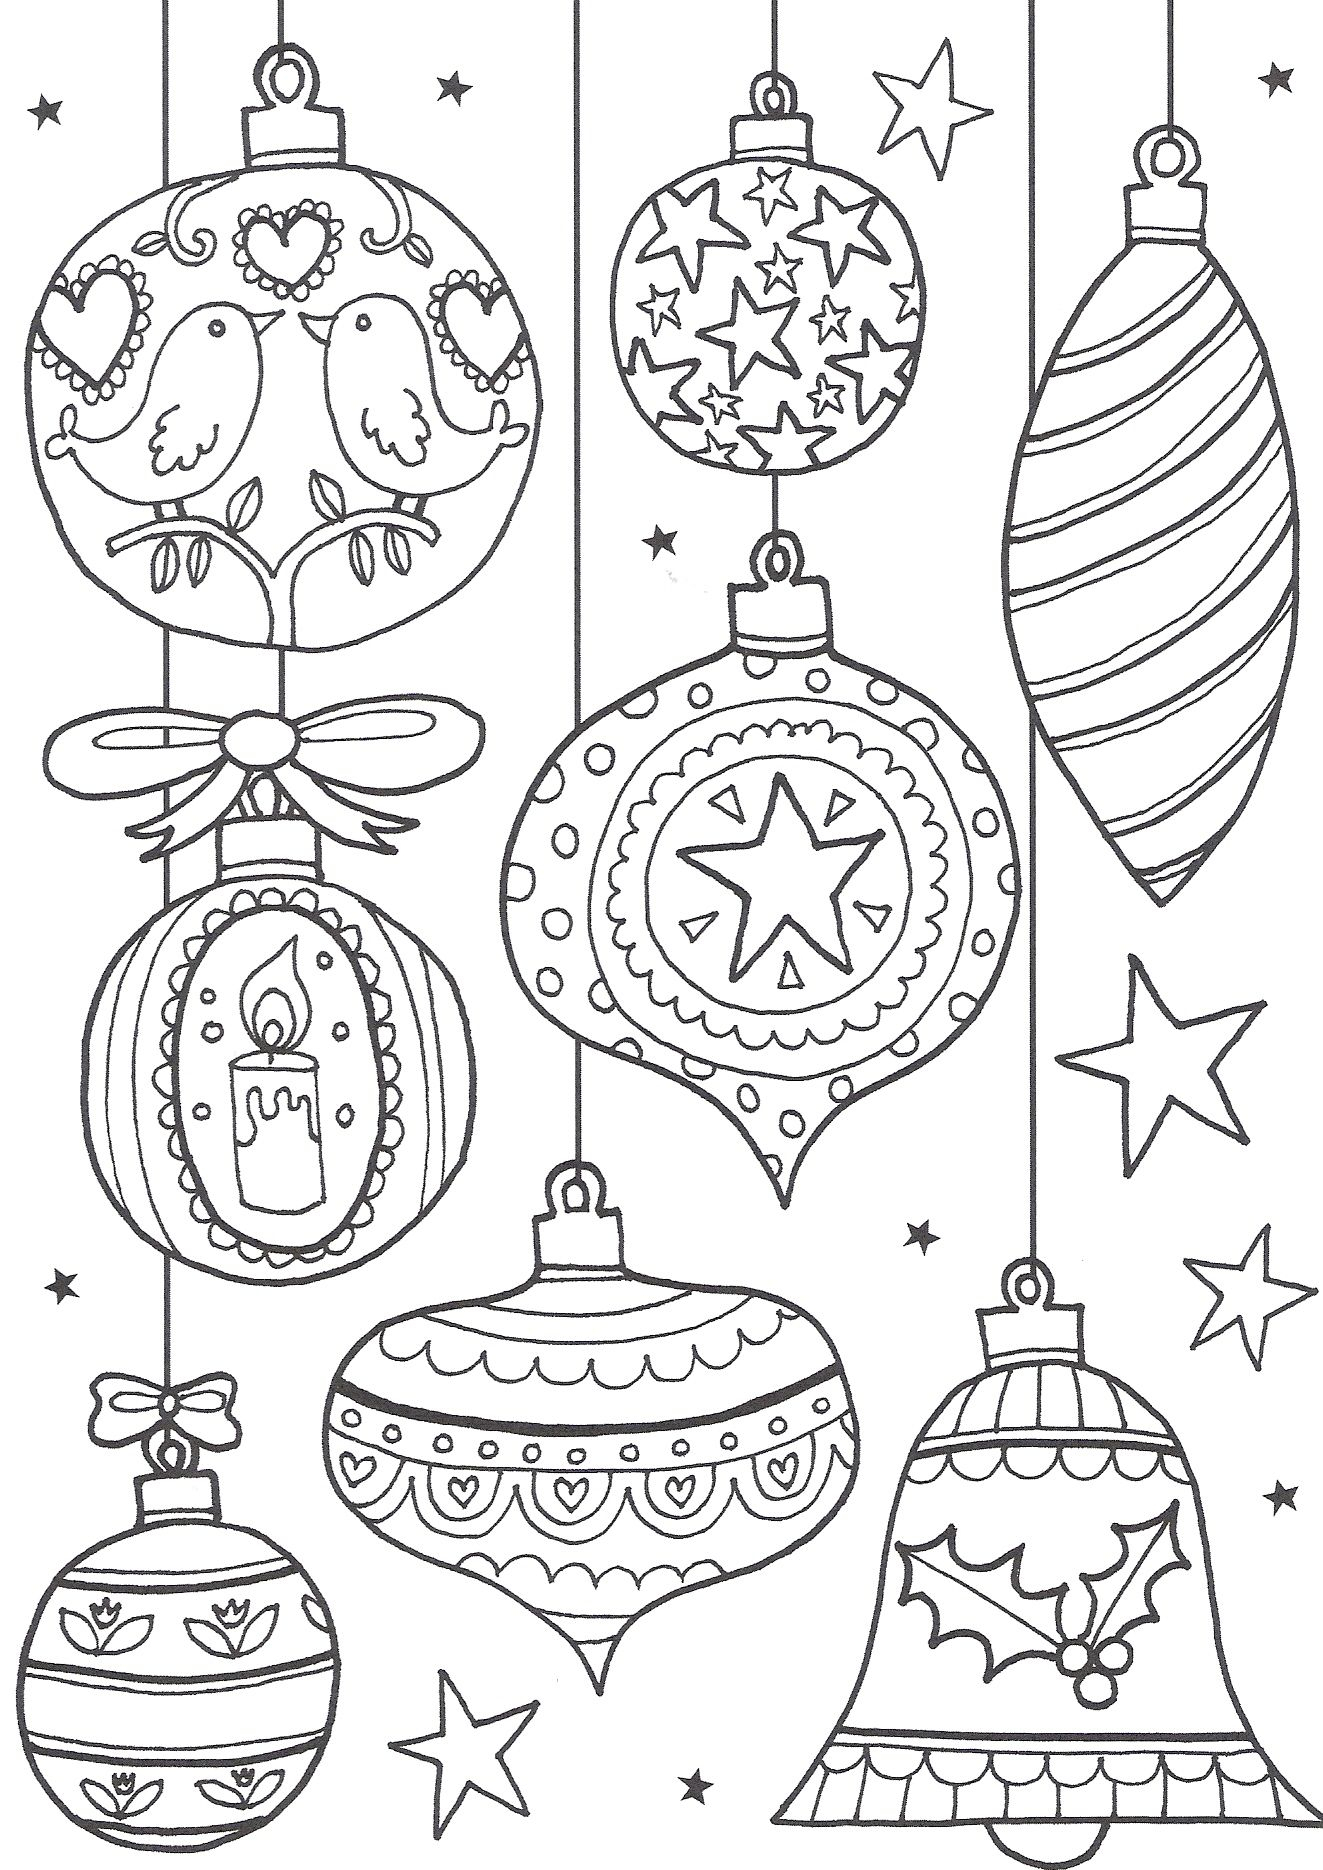 Free Christmas Colouring Pages For Adults – The Ultimate Roundup - Xmas Coloring Pages Free Printable